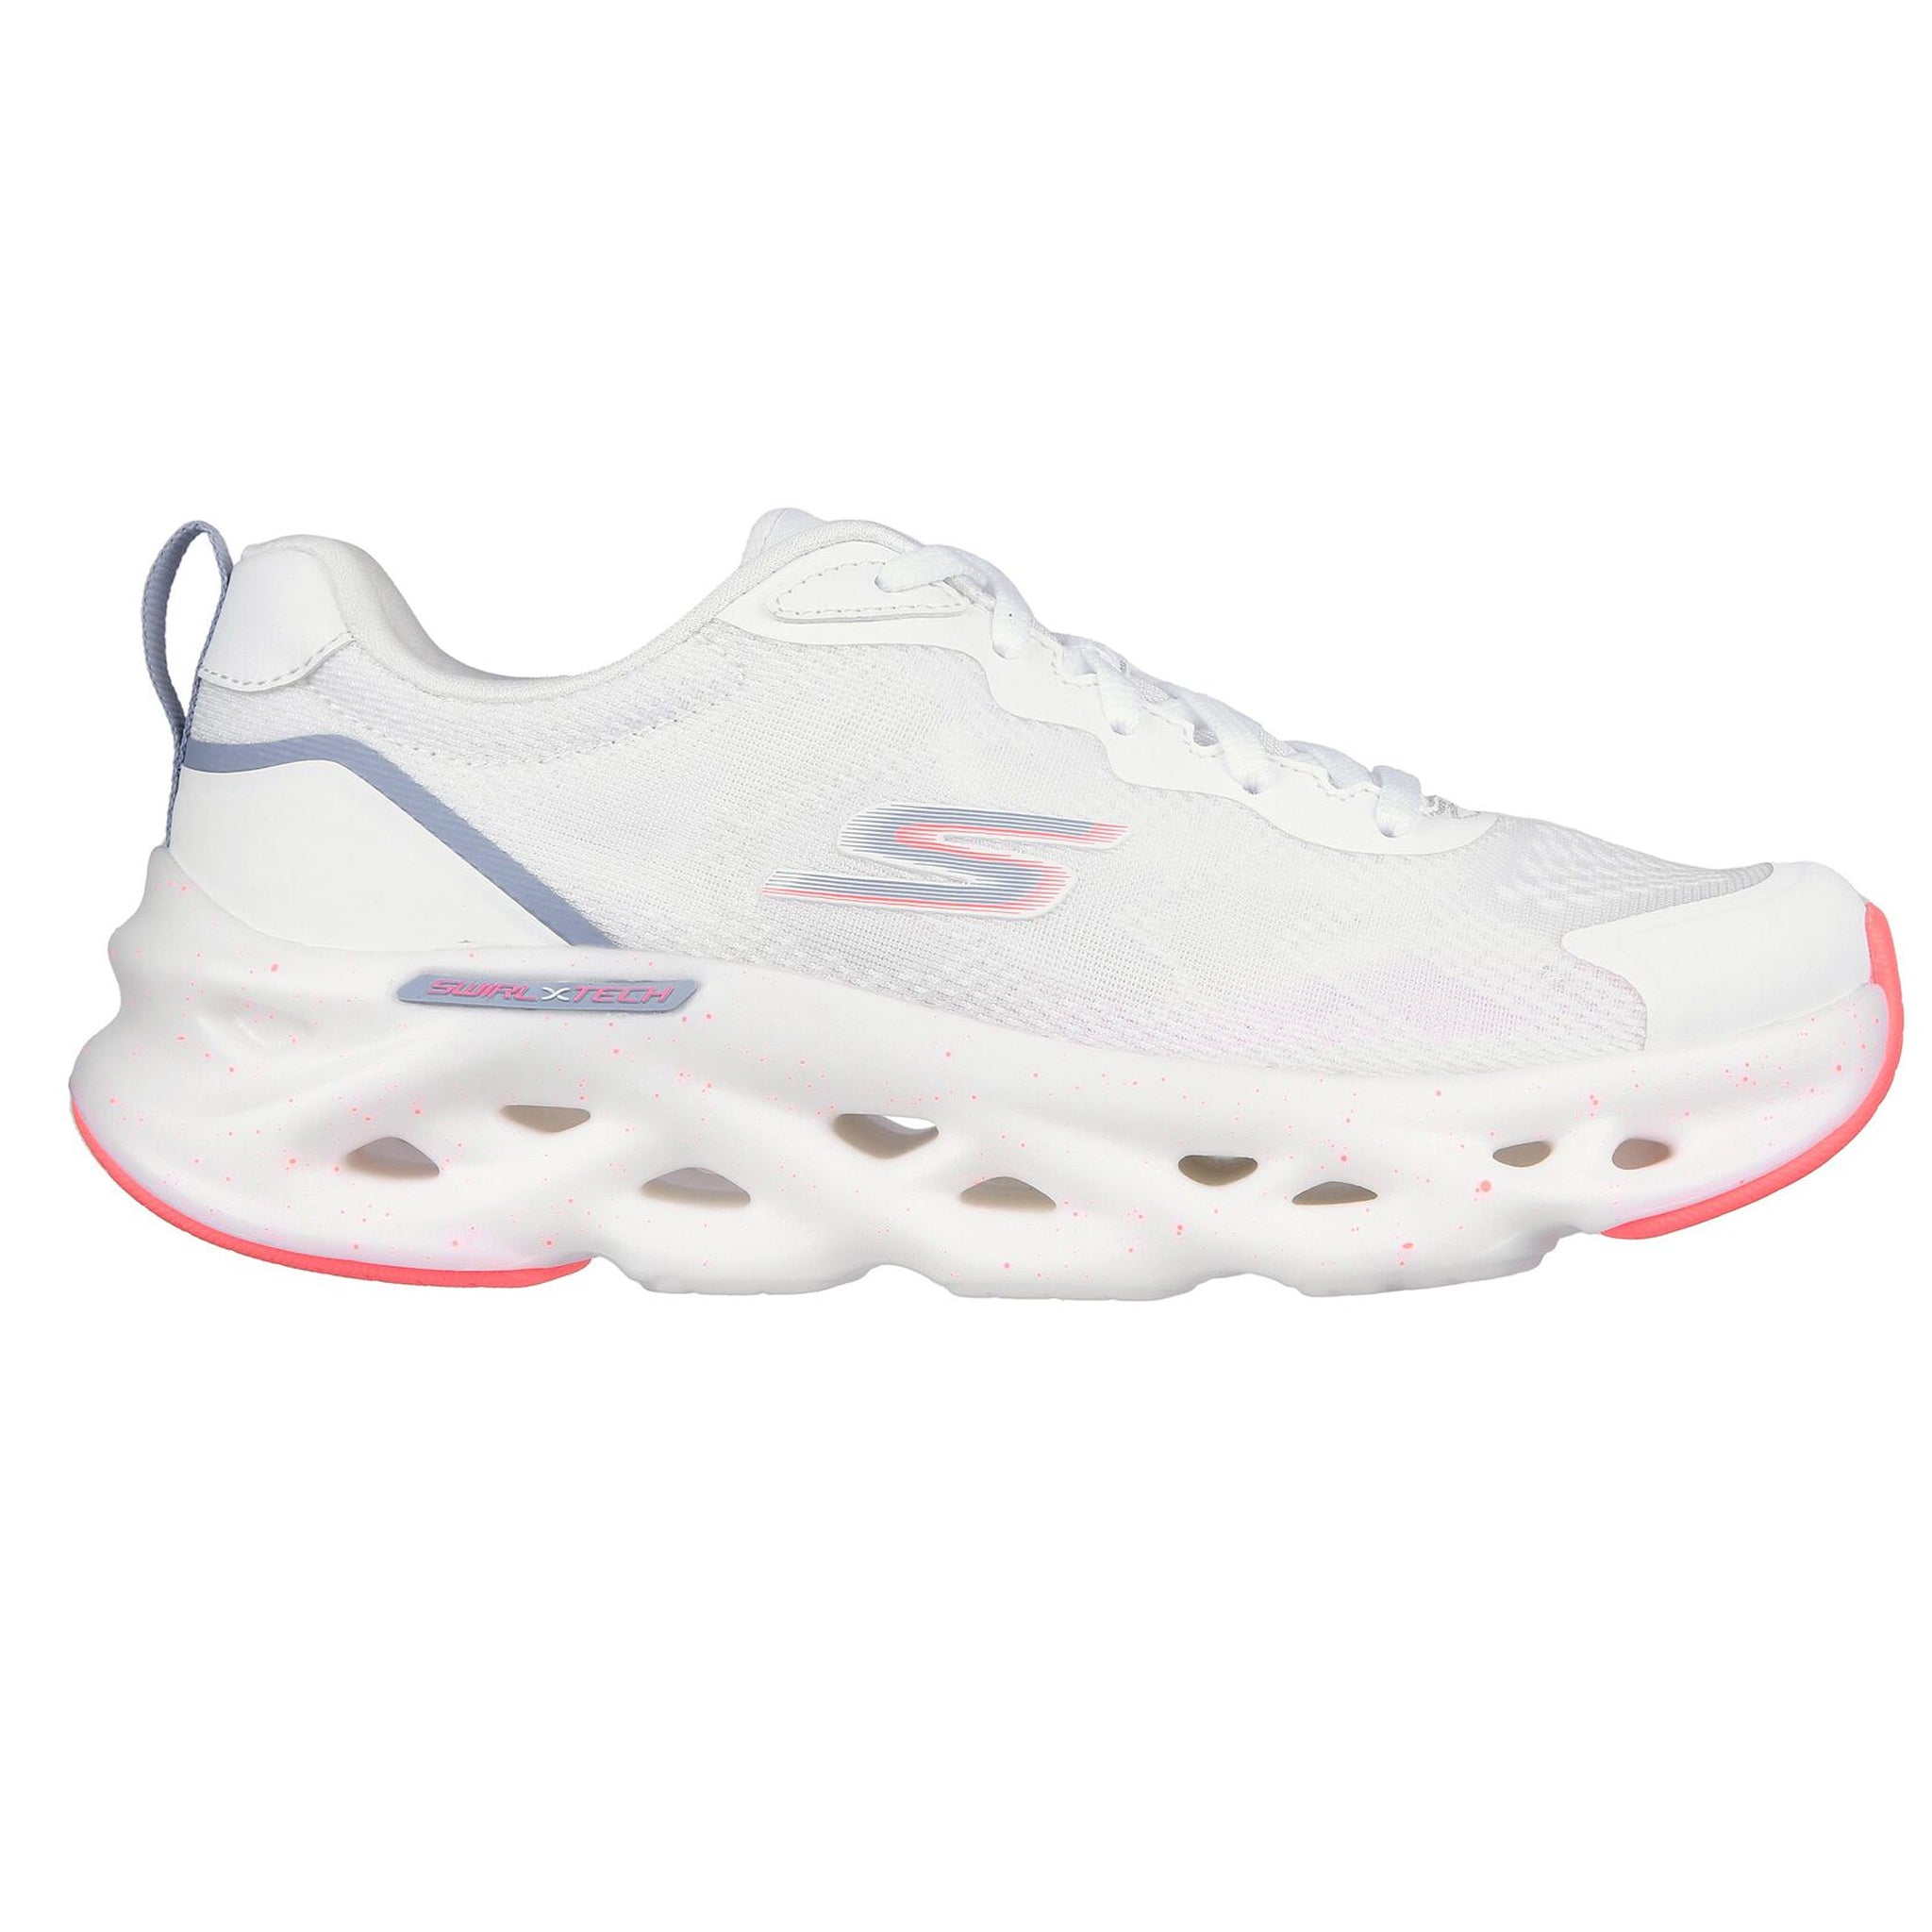 Skechers Women's 128794 GO Swirl Tech Outbreak White Blue Pink – That Shoe Store and More